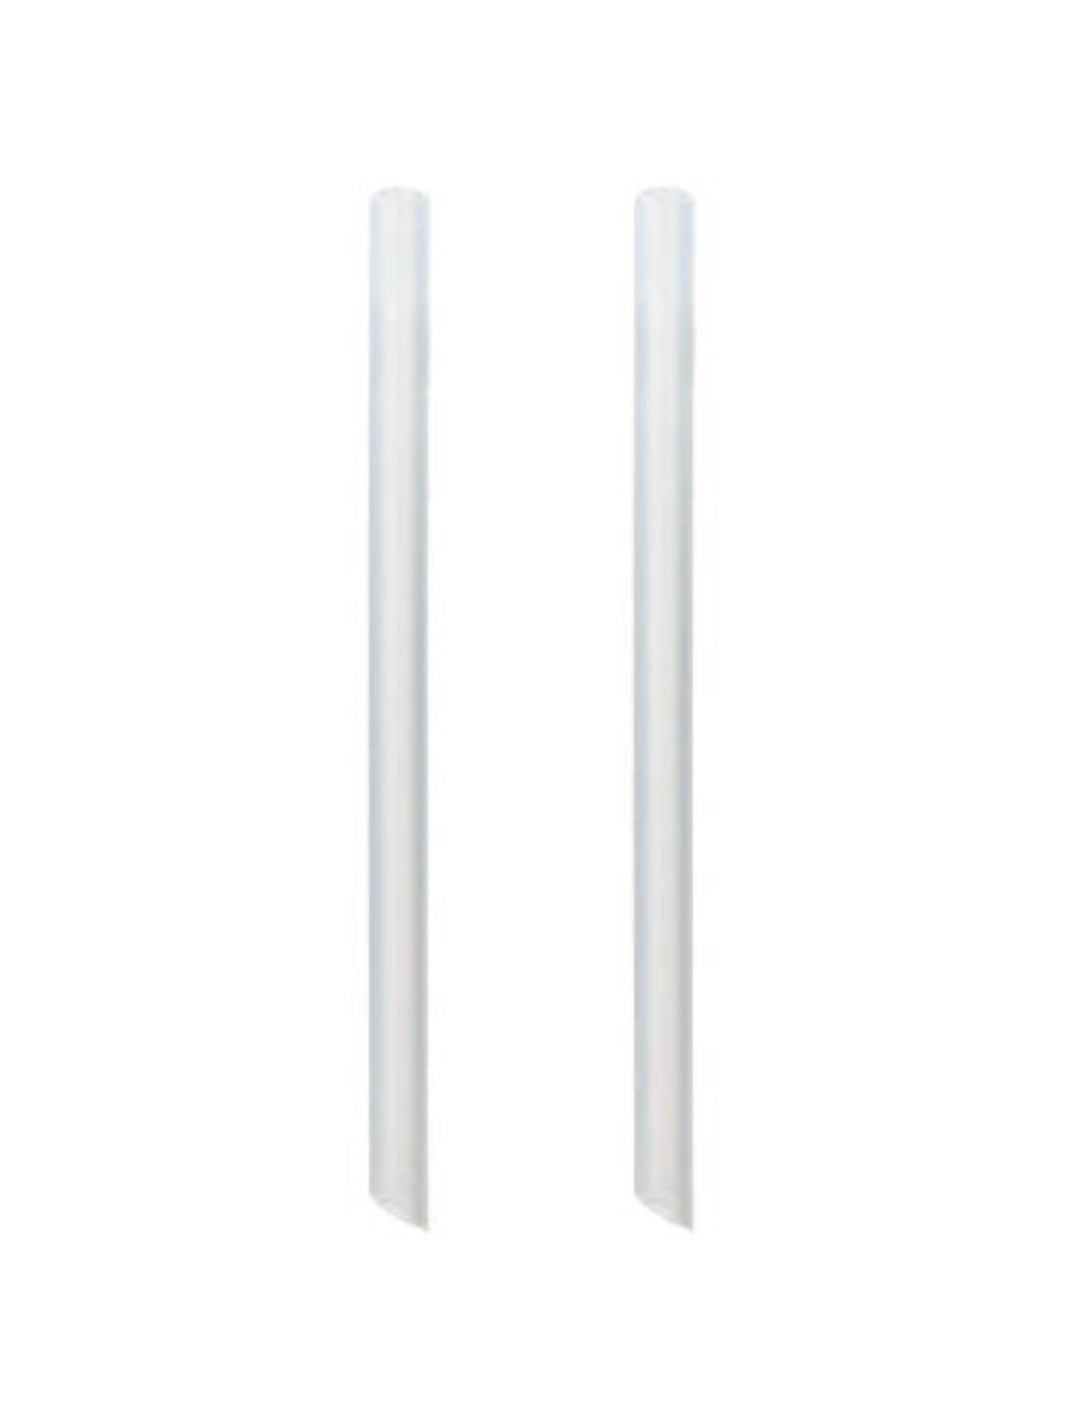 KINTO PLAY TUMBLER Replacement Straw Set of 2